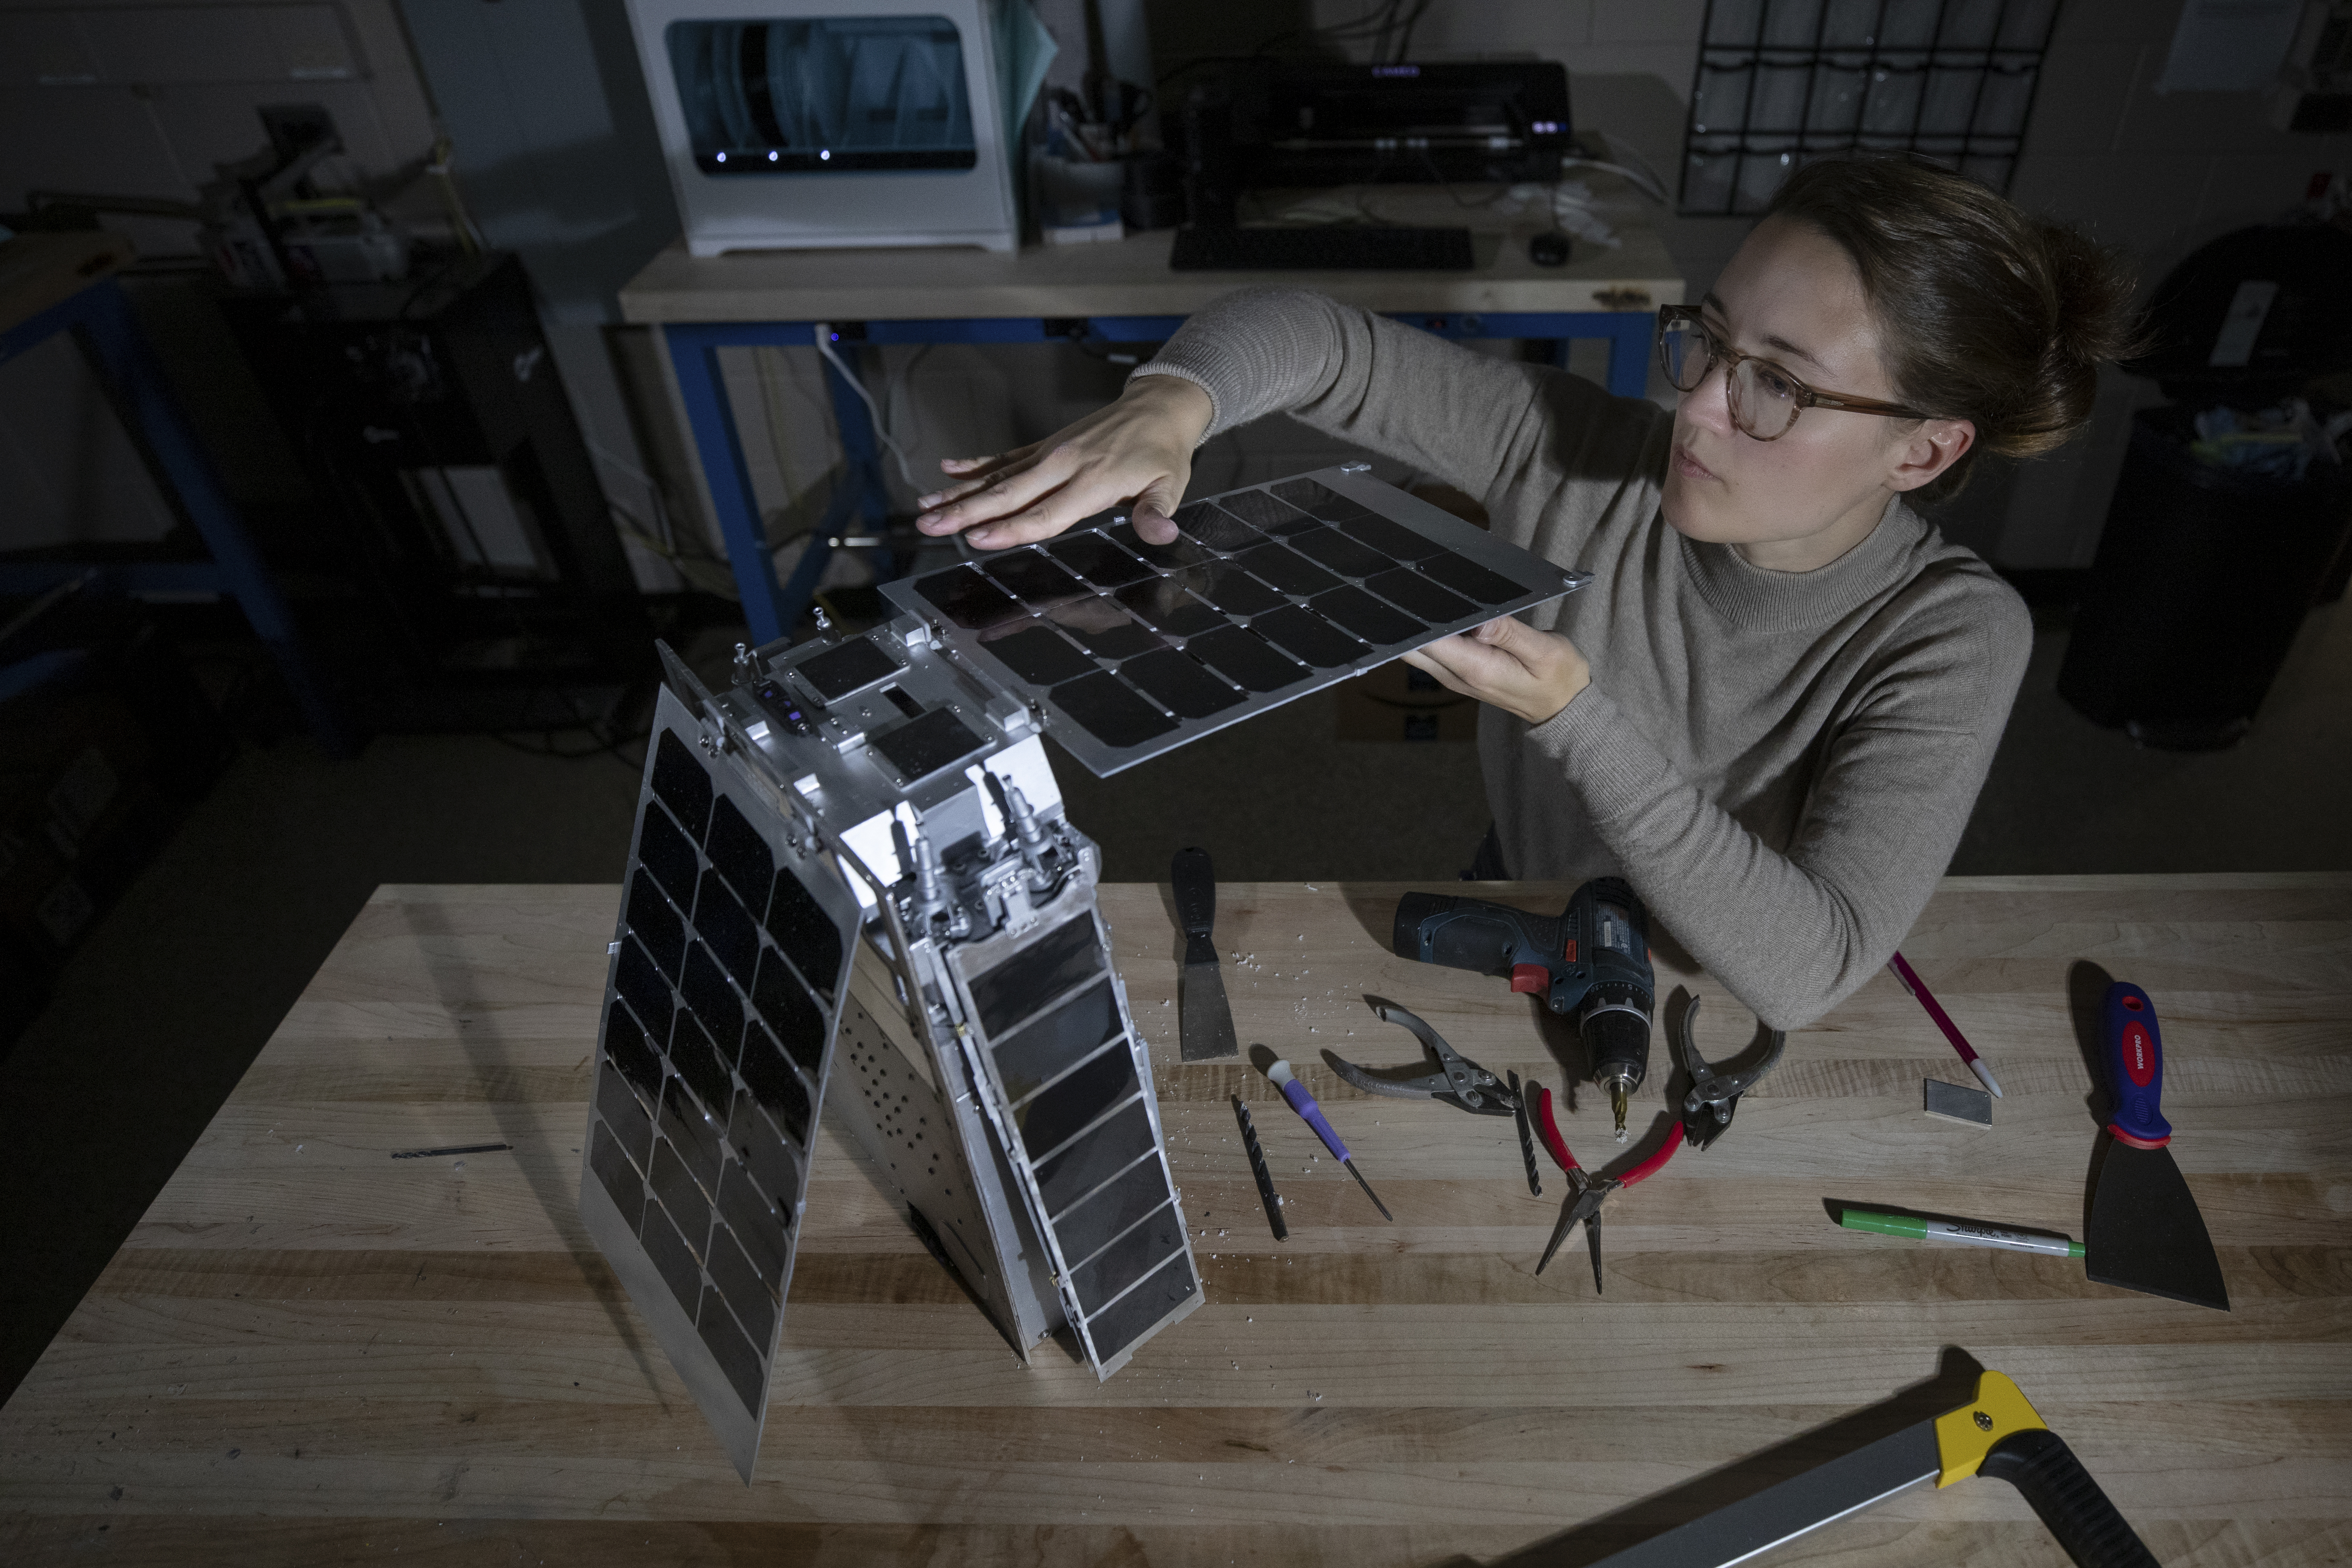 GTRI student assistant Mary Kate Broadway makes final adjustments to Lunar Flashlight model in the SEEDLab makerspace